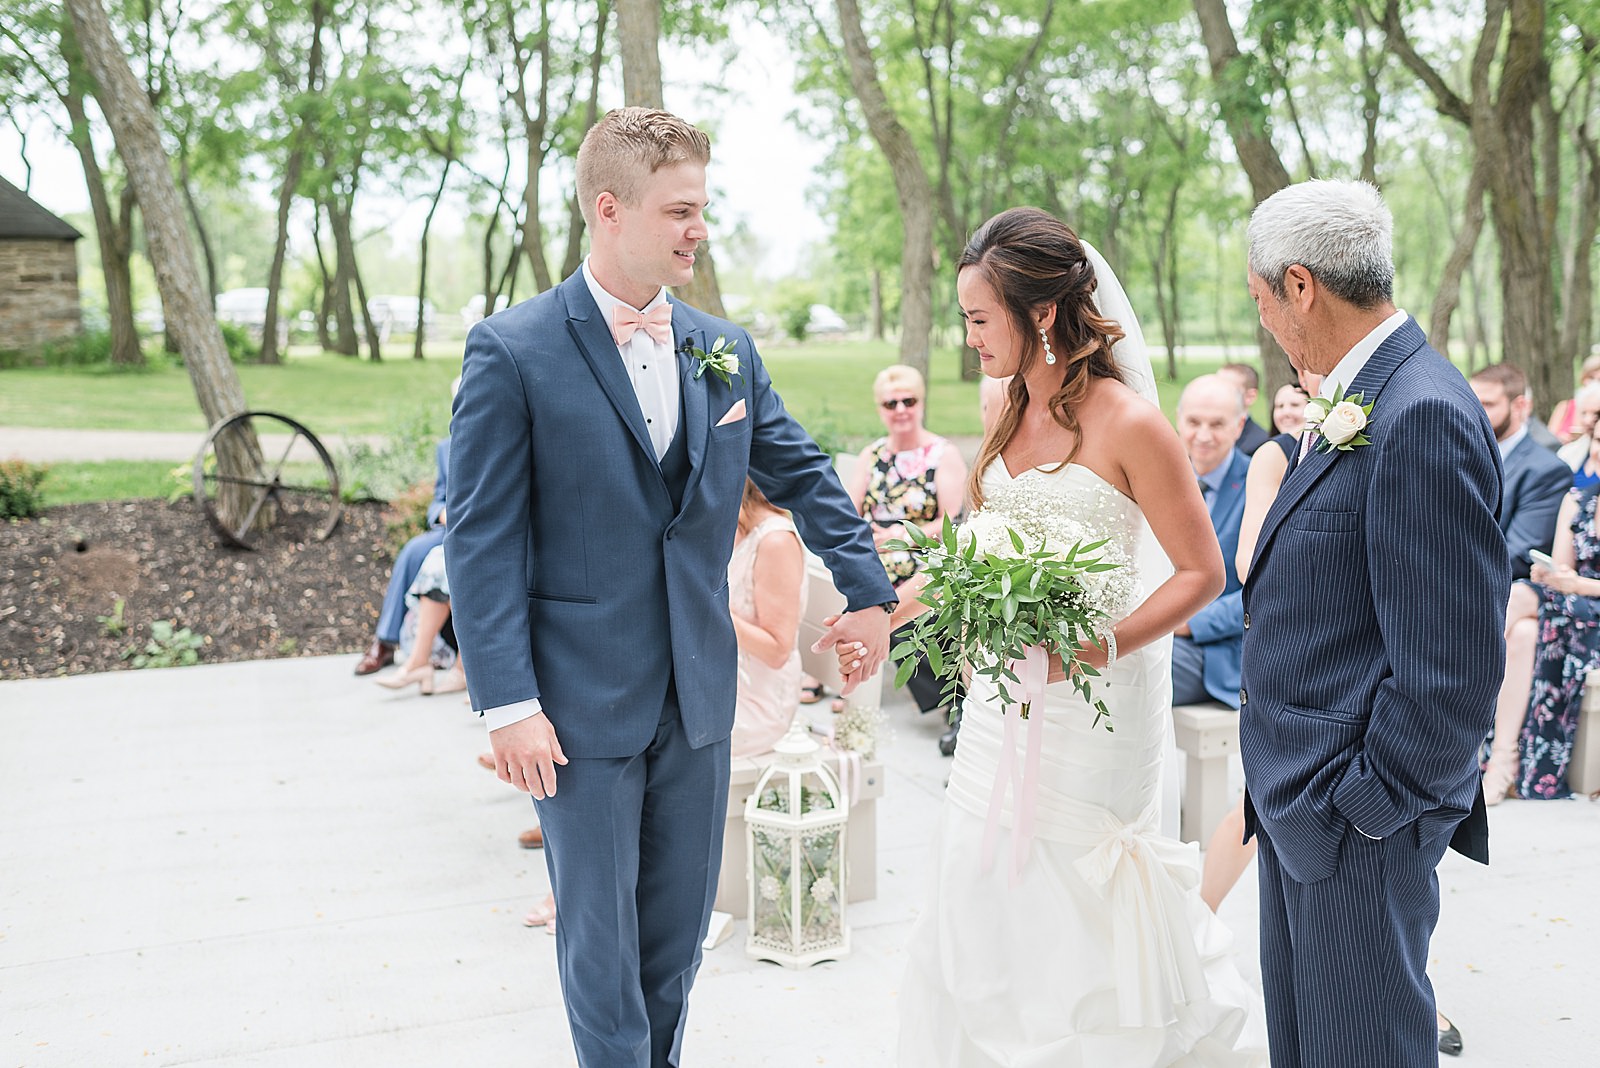 Summer Stonefields Estate Wedding | Ottawa Wedding | Wedding photos at the Barn Loft at Stonefields Estate in Beckwith Get more inspiration from this fun summertime wedding. #ottawawedding #weddingphotography #ottawaweddings